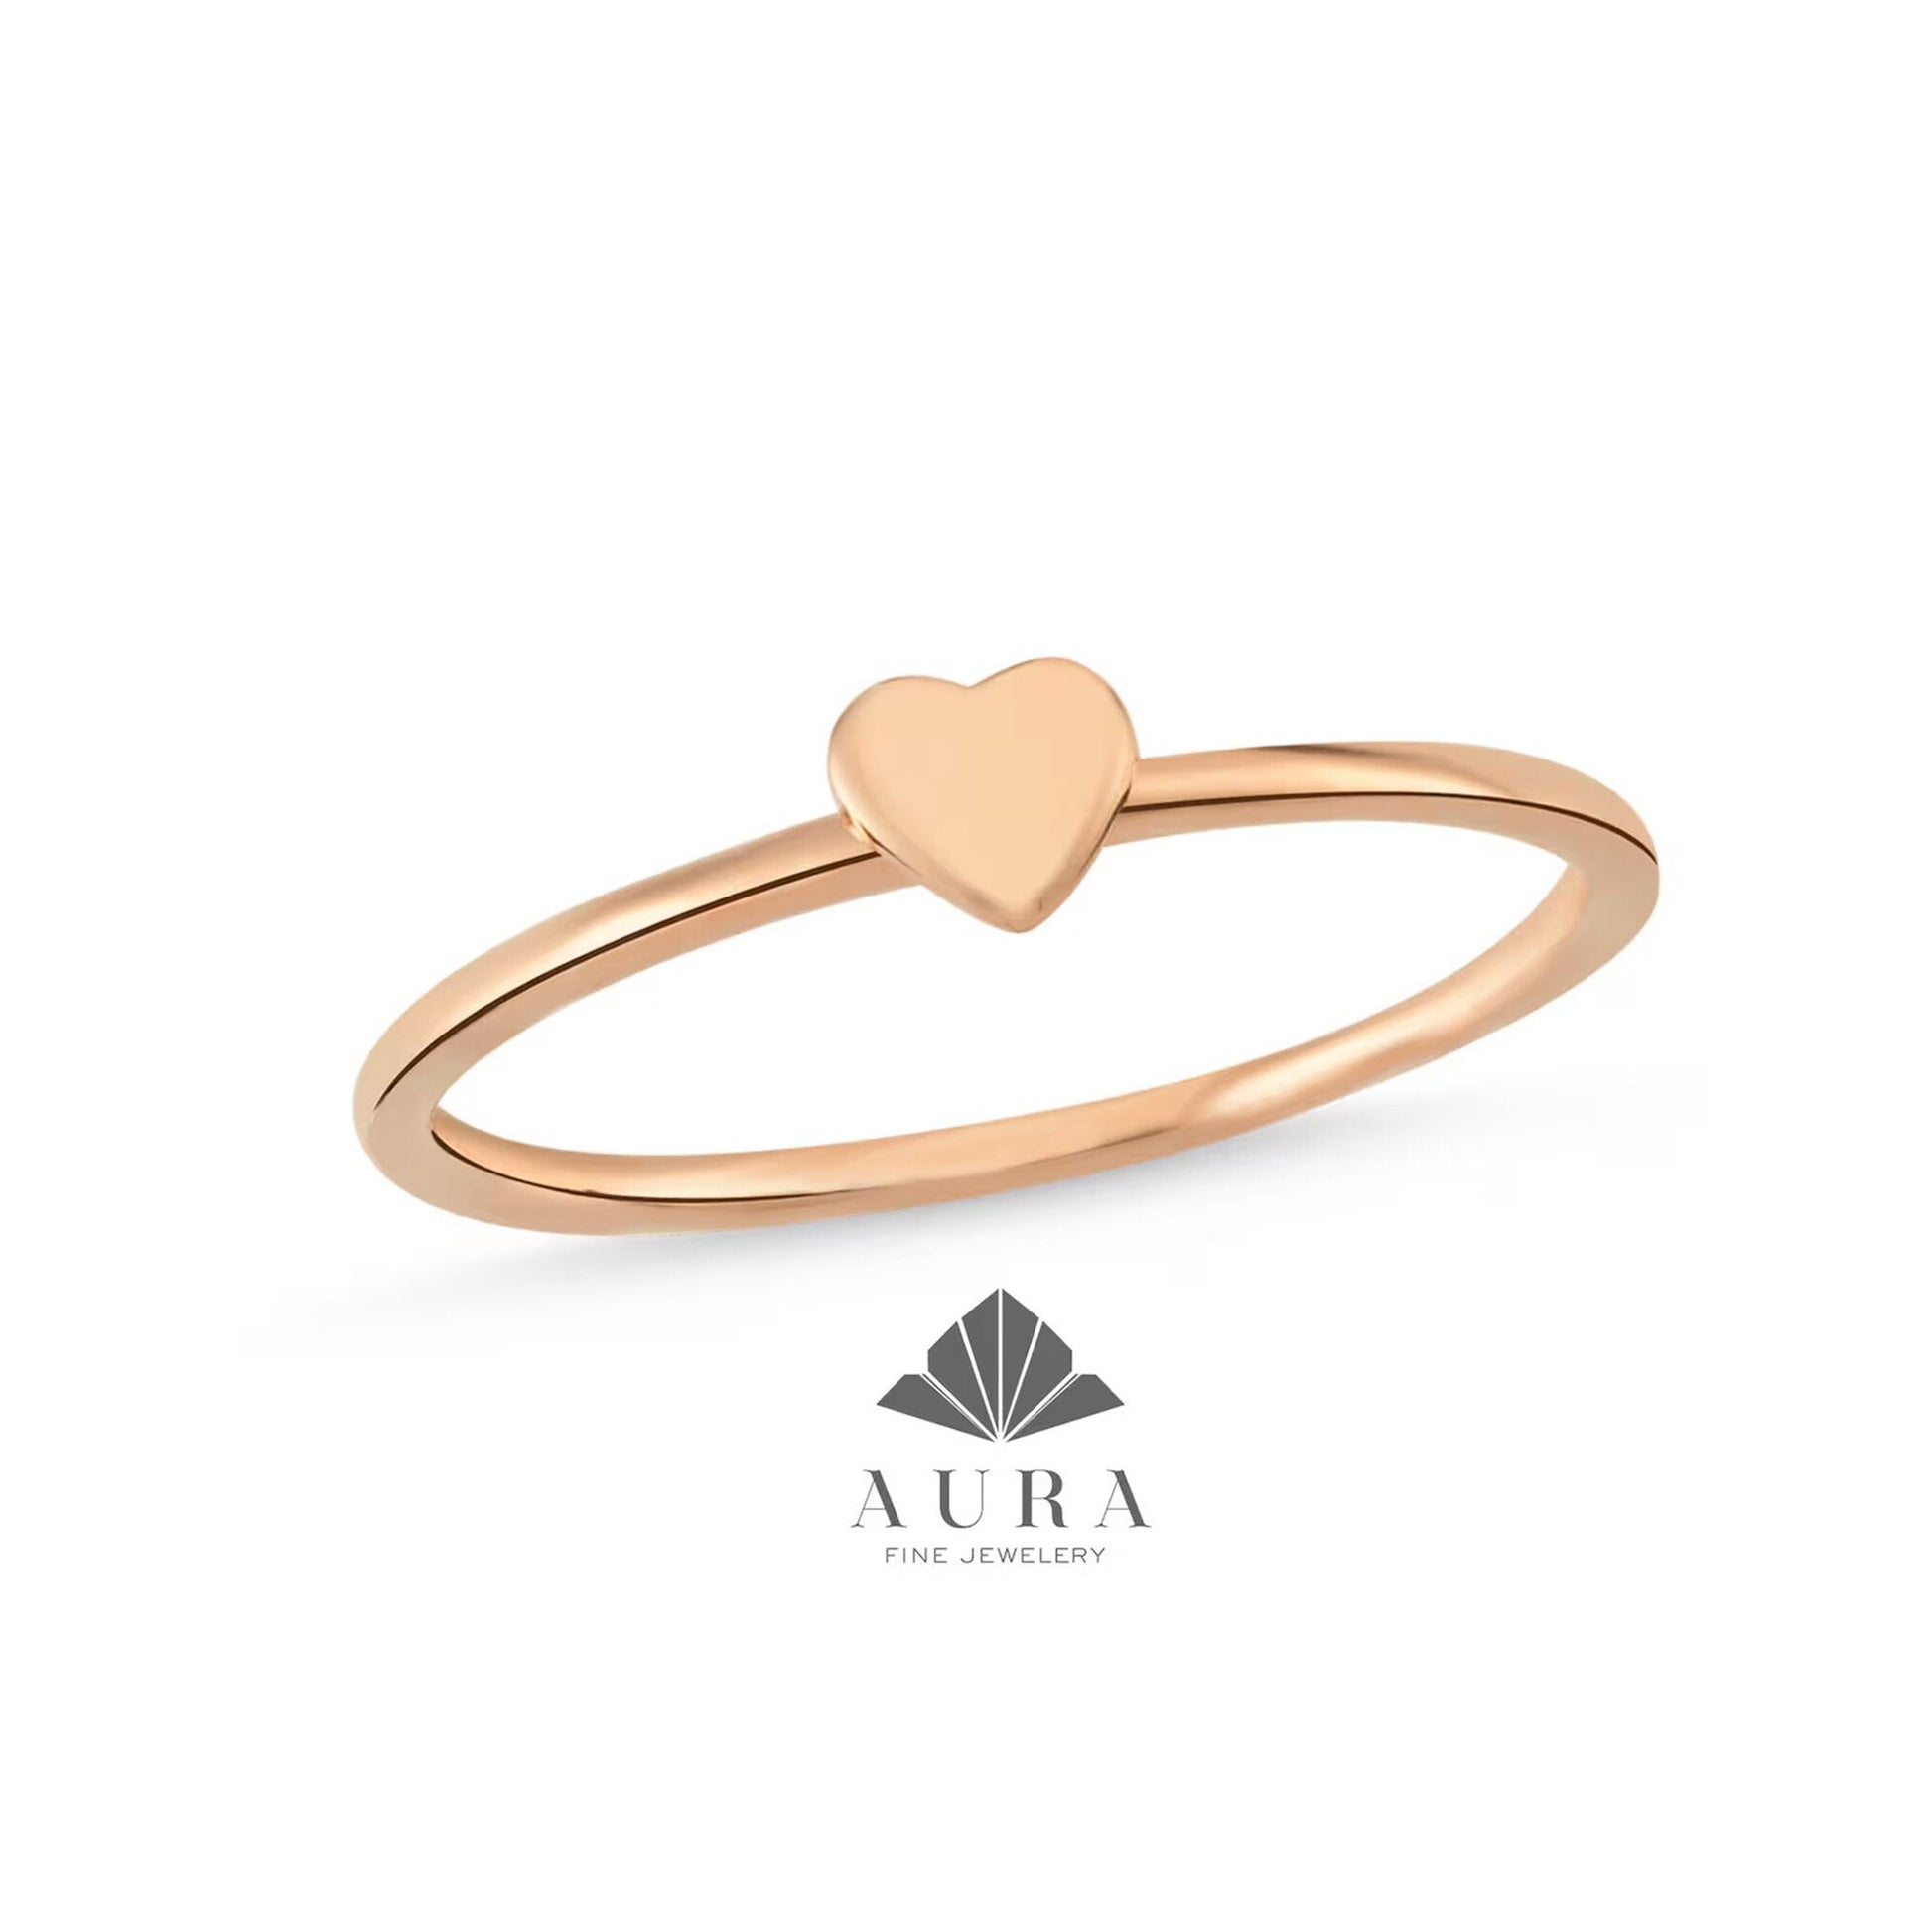 14K Gold Heart Ring, Small Heart Ring, Dainty Heart Knuckle Ring, Gold Heart Band, Thin Heart Ring, Minimal Love Ring, Gift for Her